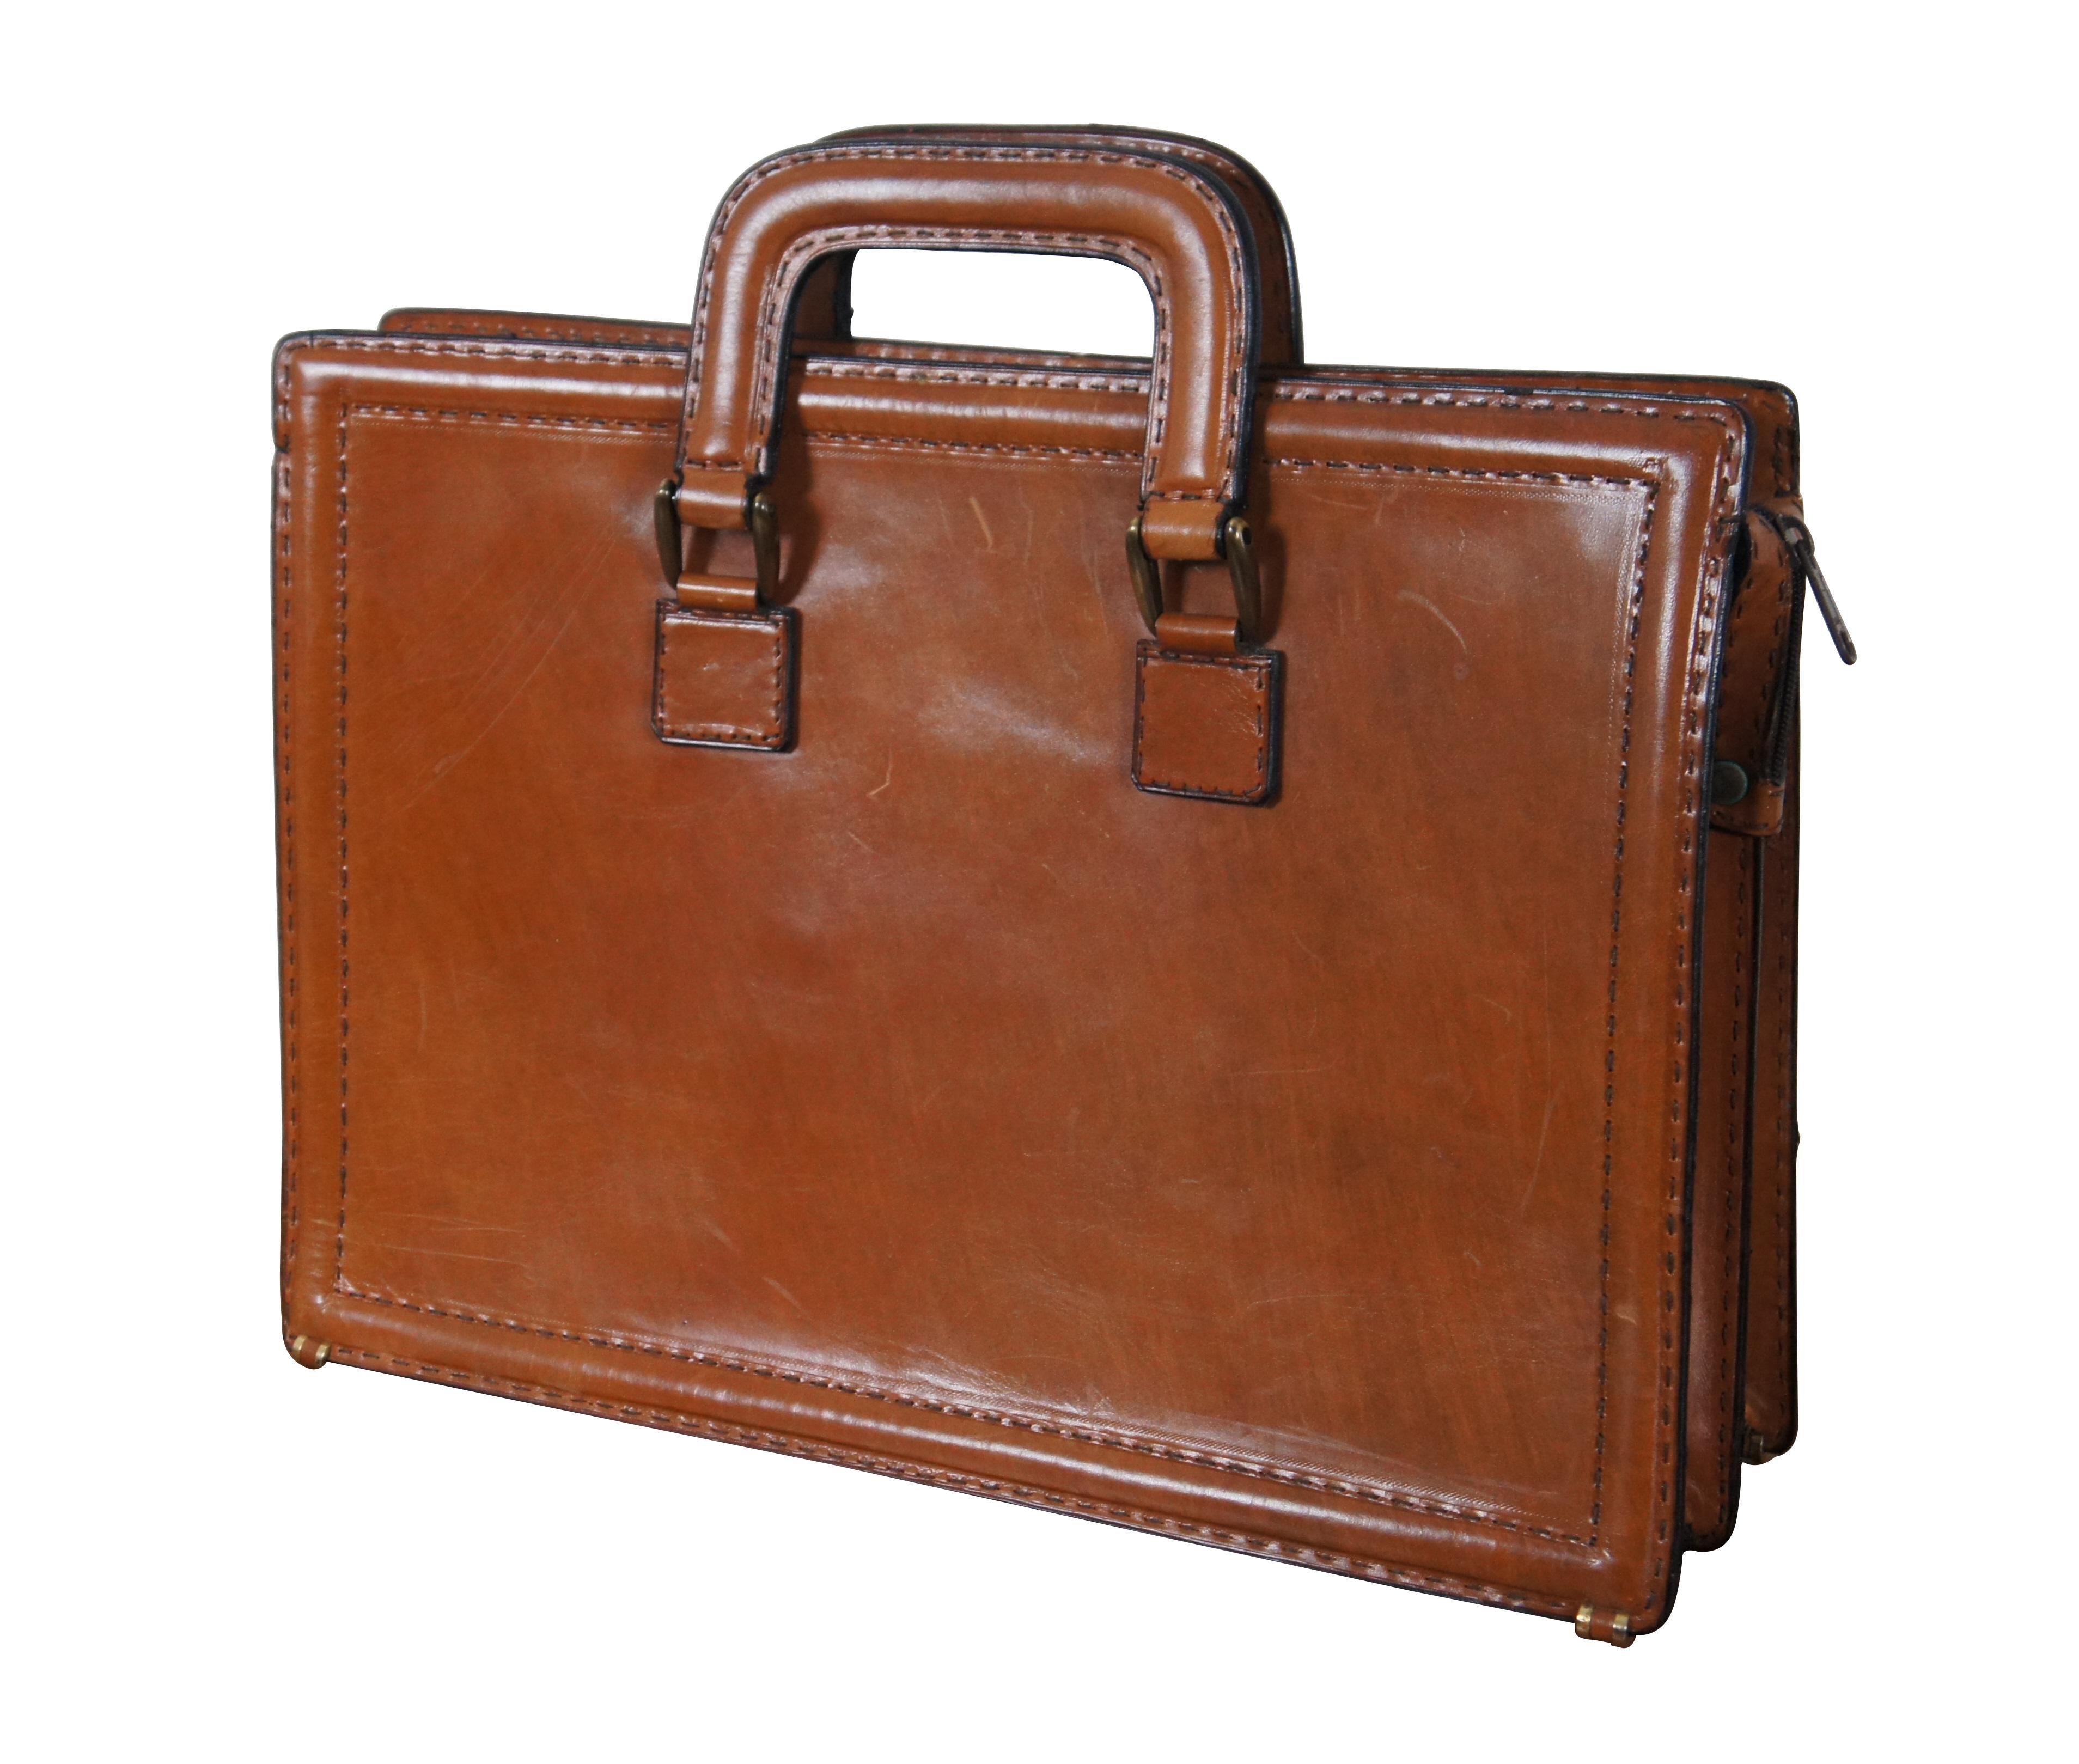 Vintage Bally brown leather attache / brief case featuring double handles, bold contrast stitching and zipper closure. Interior is divided into two open sections with a zippered pocket in the middle. Made in Italy. Includes dust bag.

Dimensions: